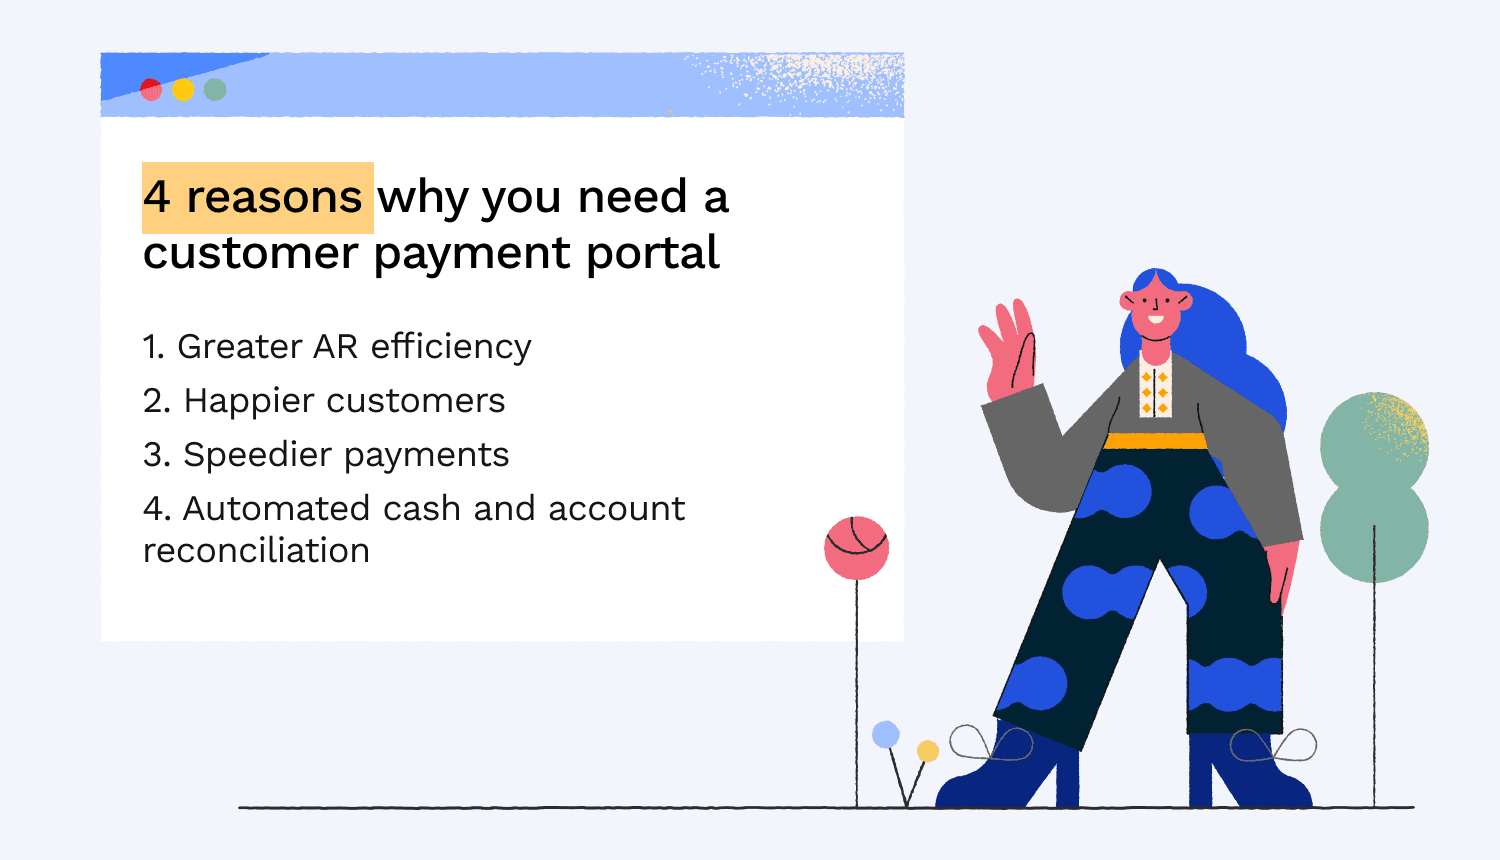 4 reasons why you need a customer payment portal